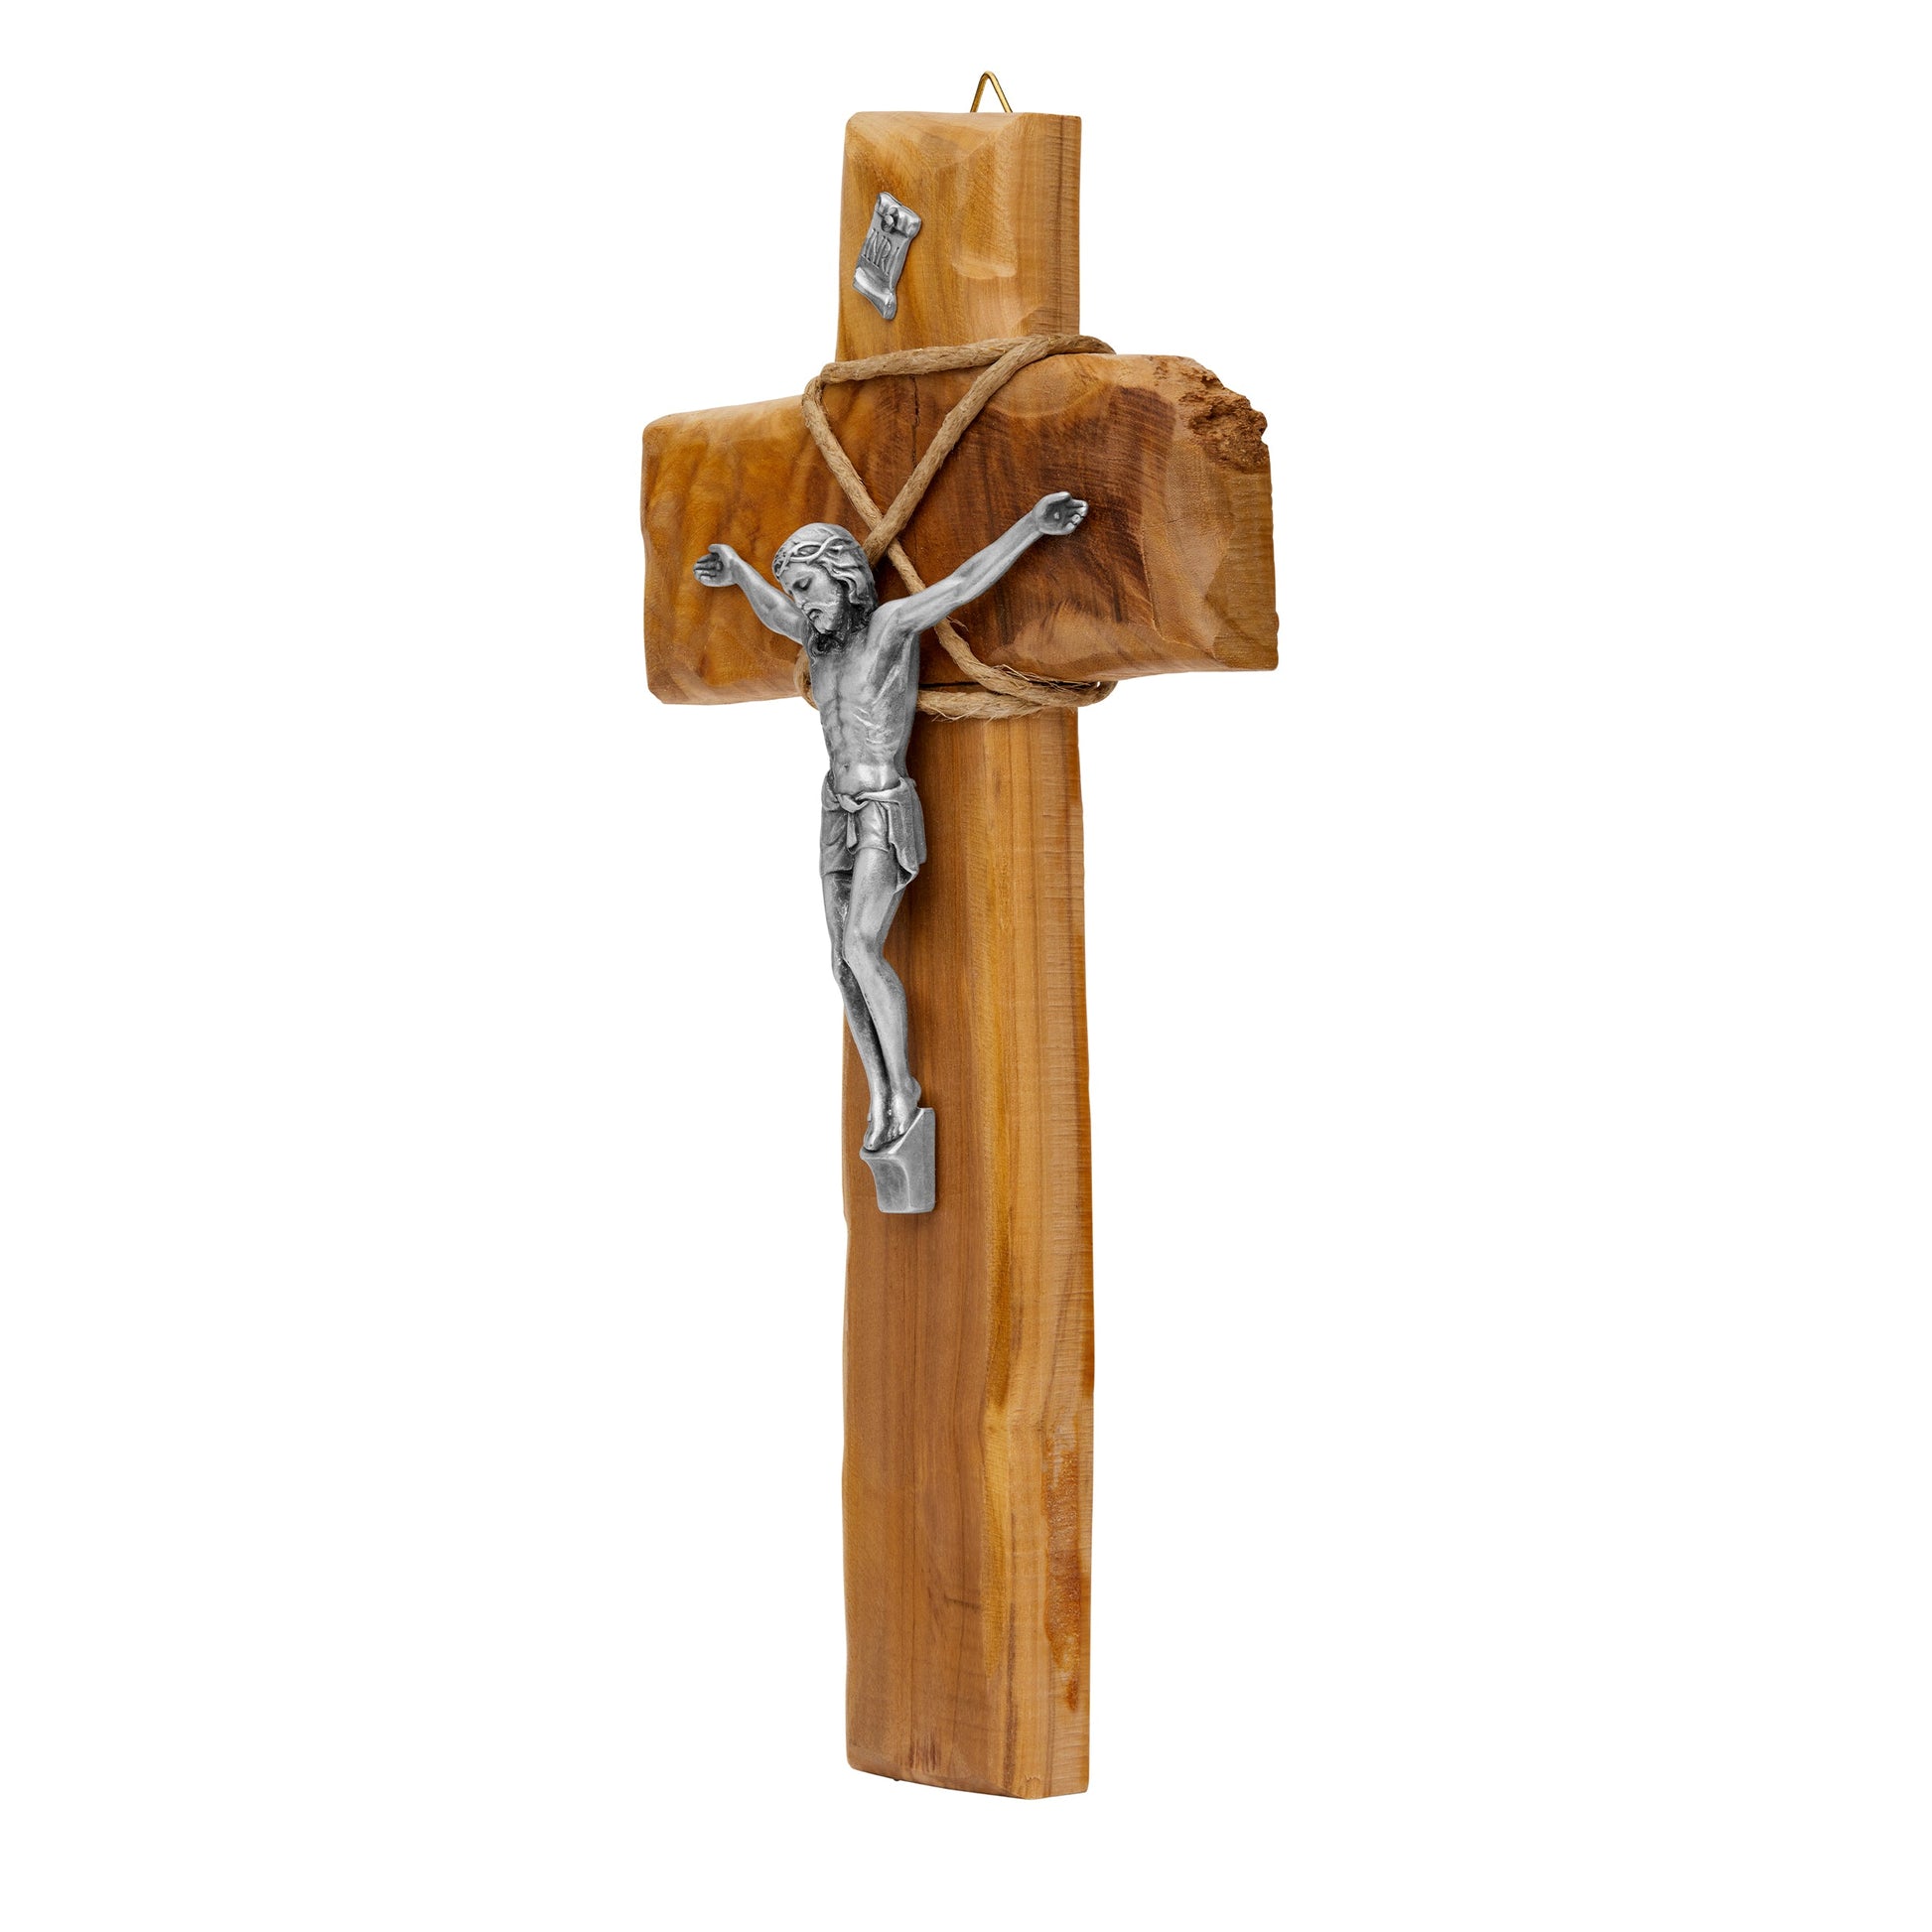 MONDO CATTOLICO 28 cm (11.02 in) Solid Olive Wood Crucifix